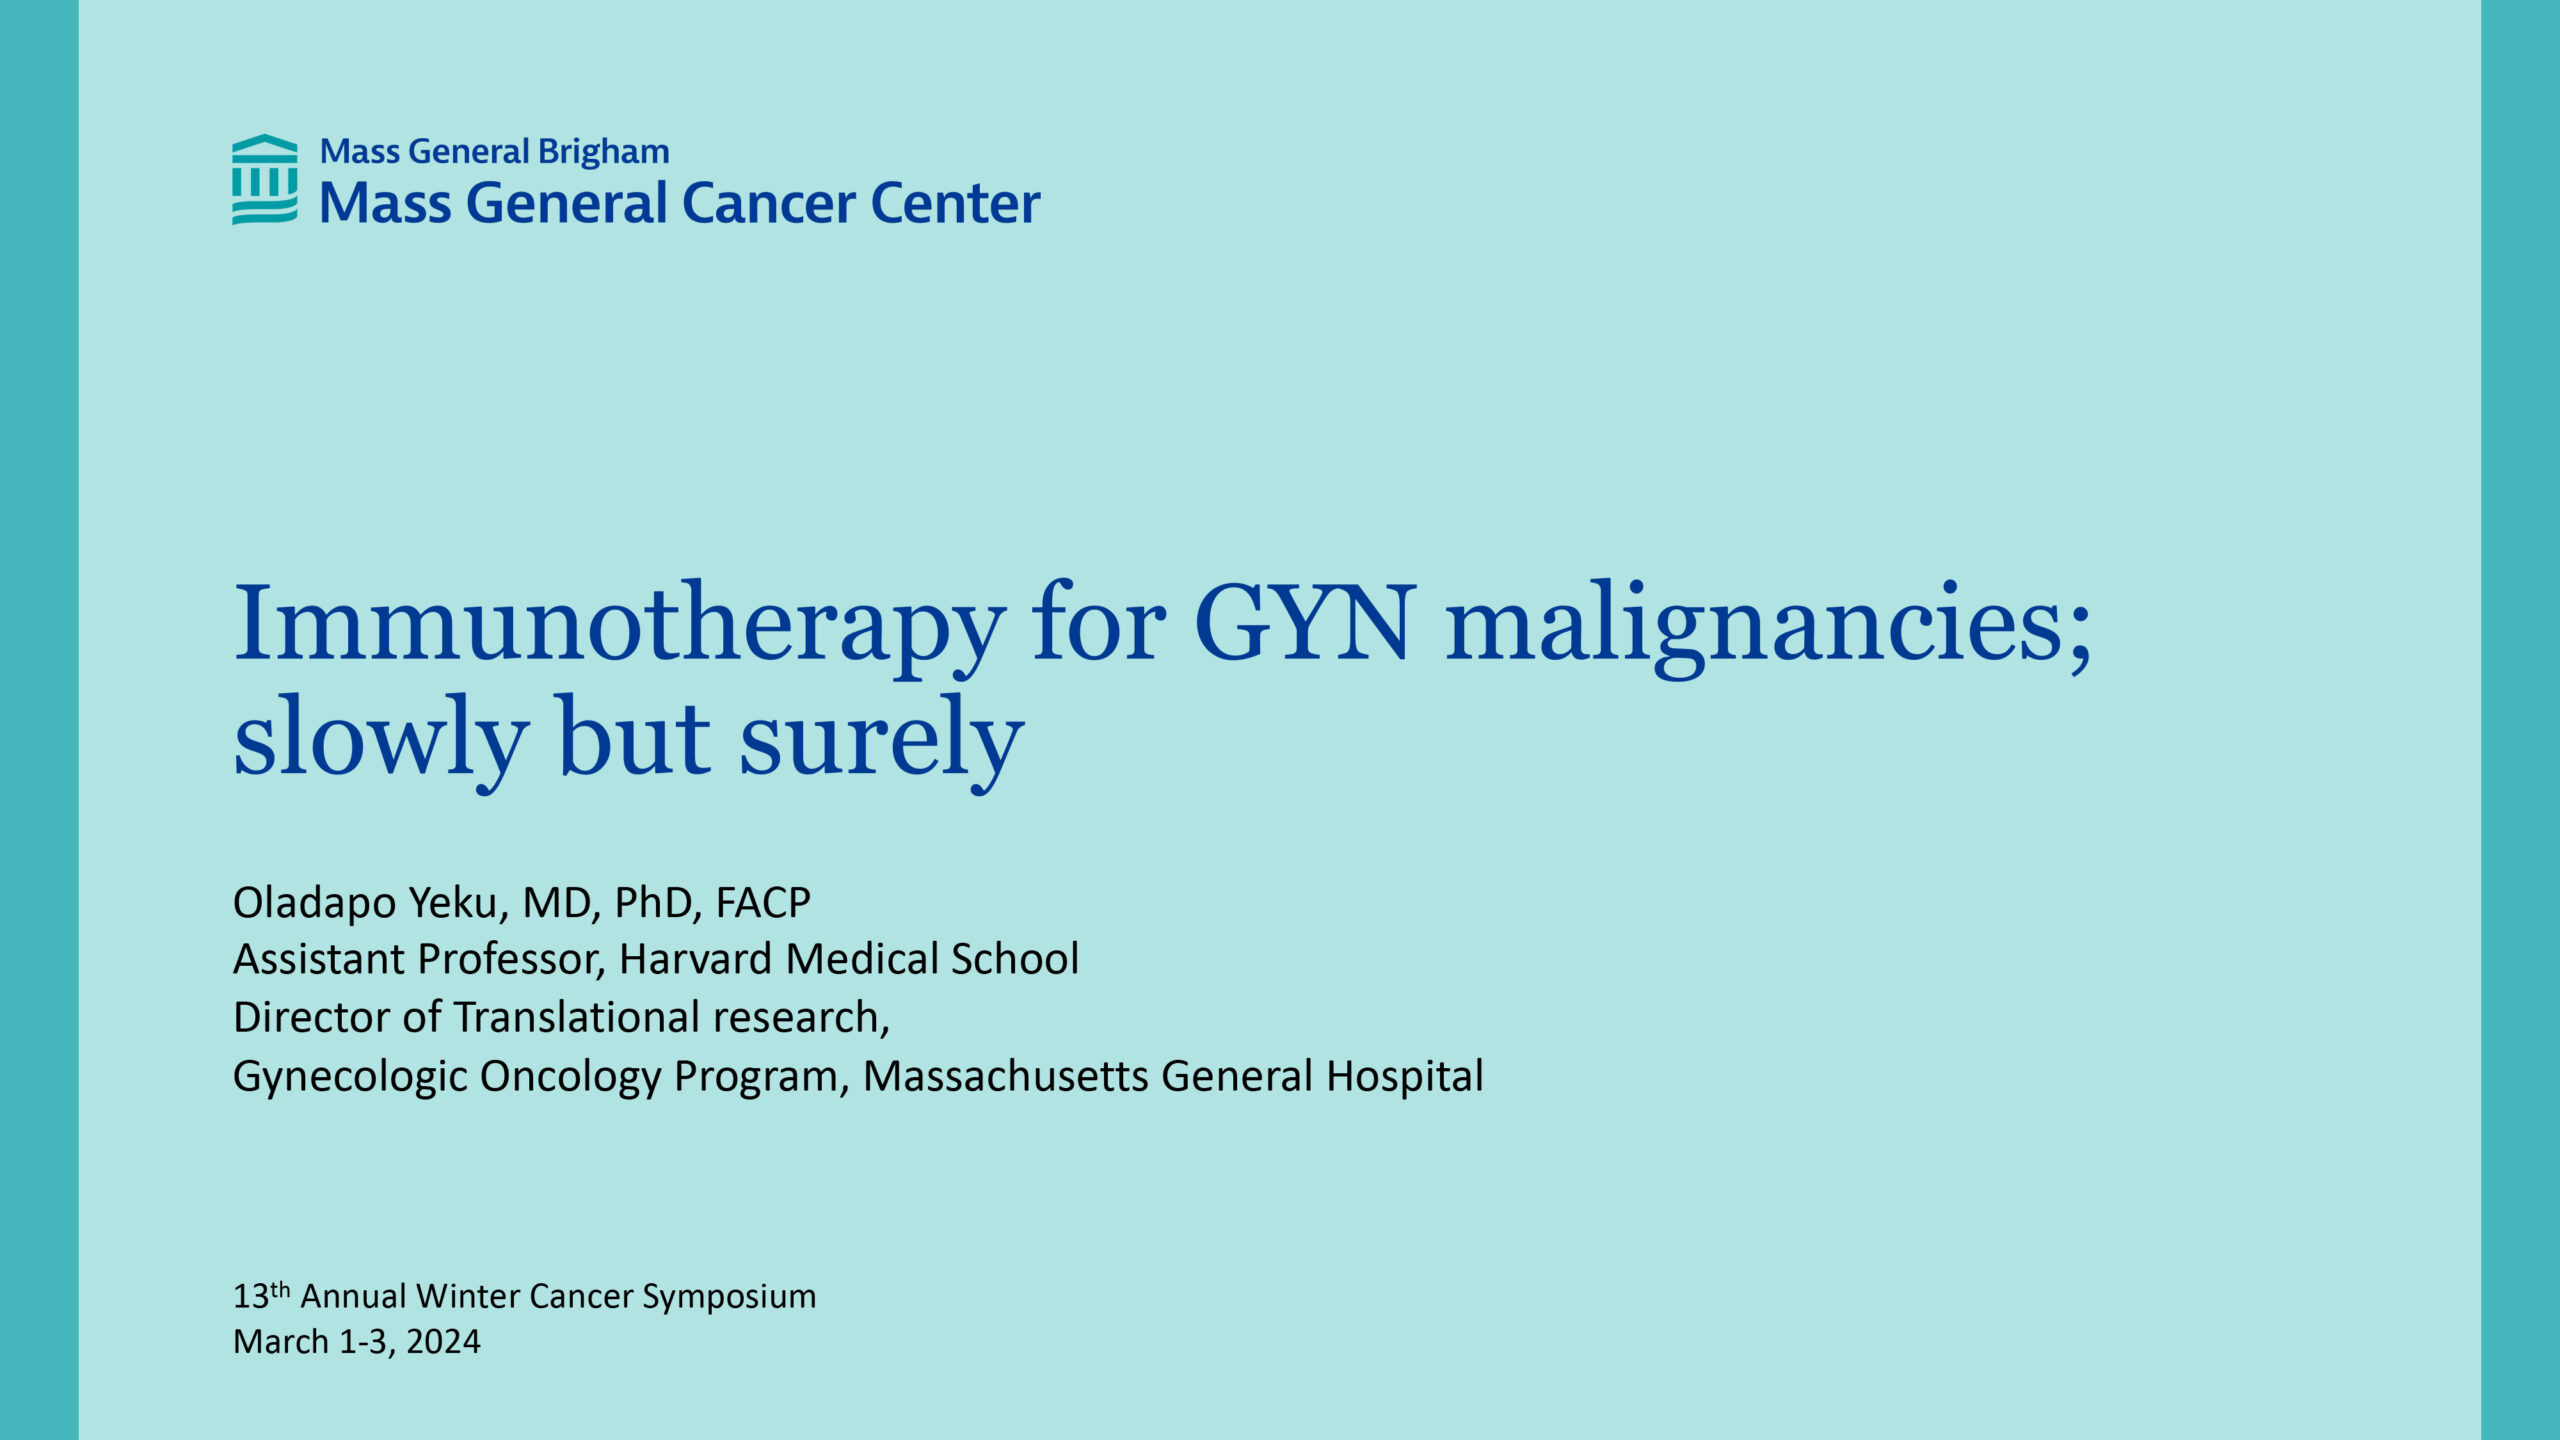 Immunotherapy for Gynecology-Oncology Malignancies: Is There Still Time for Progress?